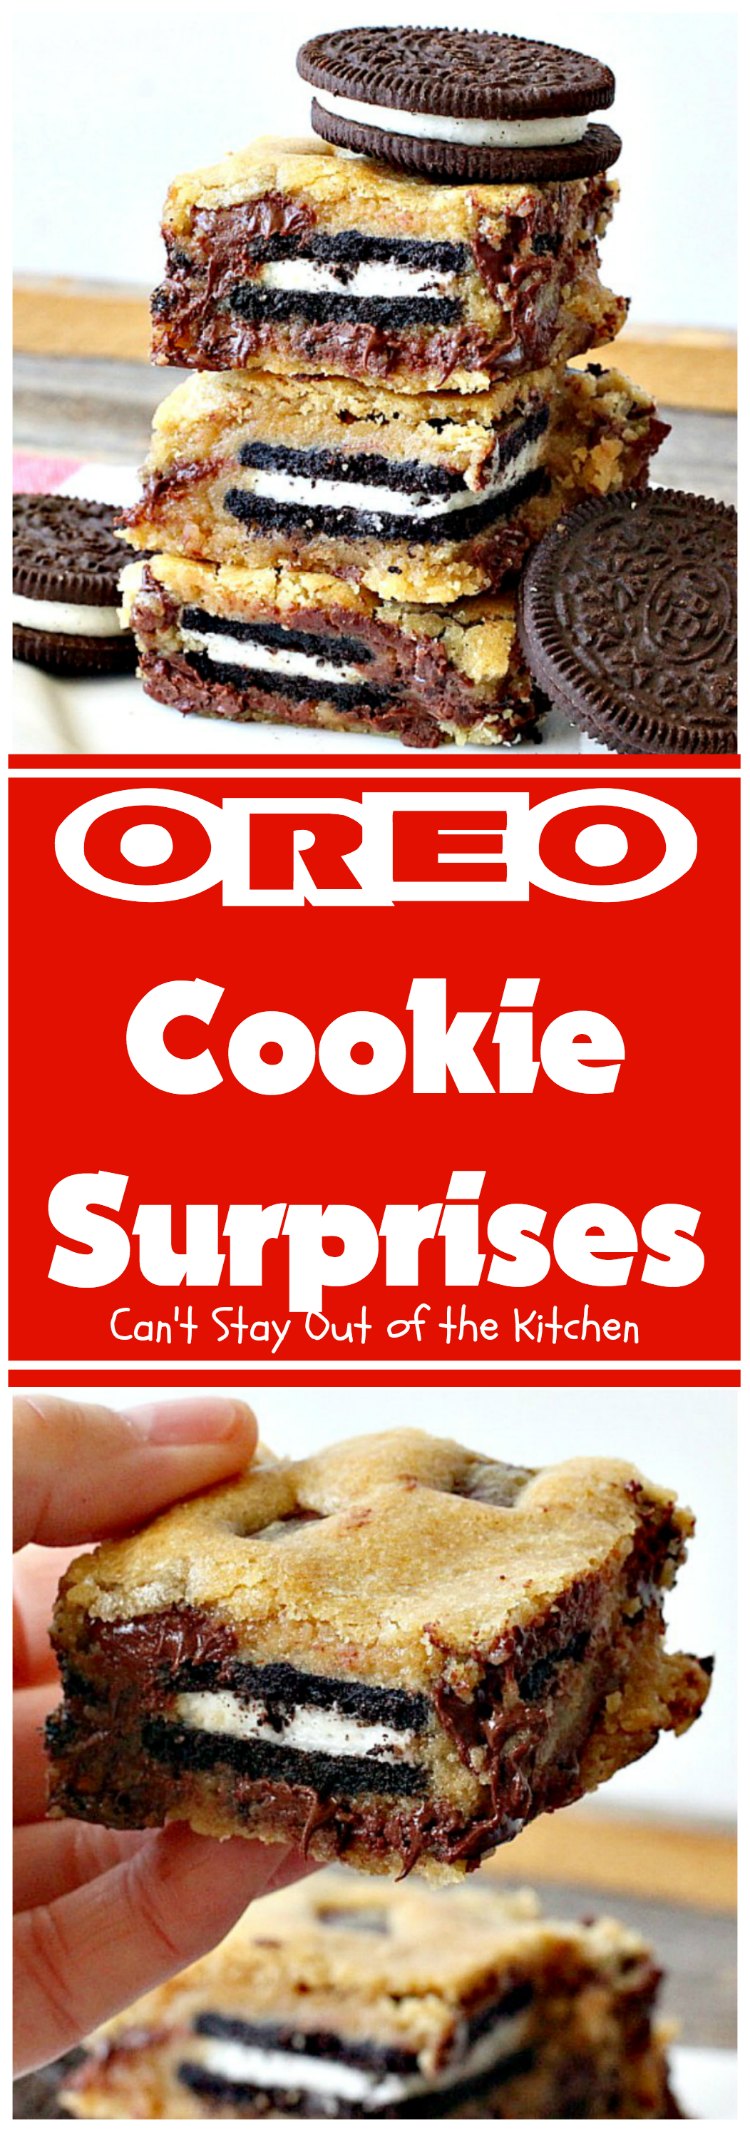 Oreo Cookie Surprises | Can't Stay Out of the Kitchen